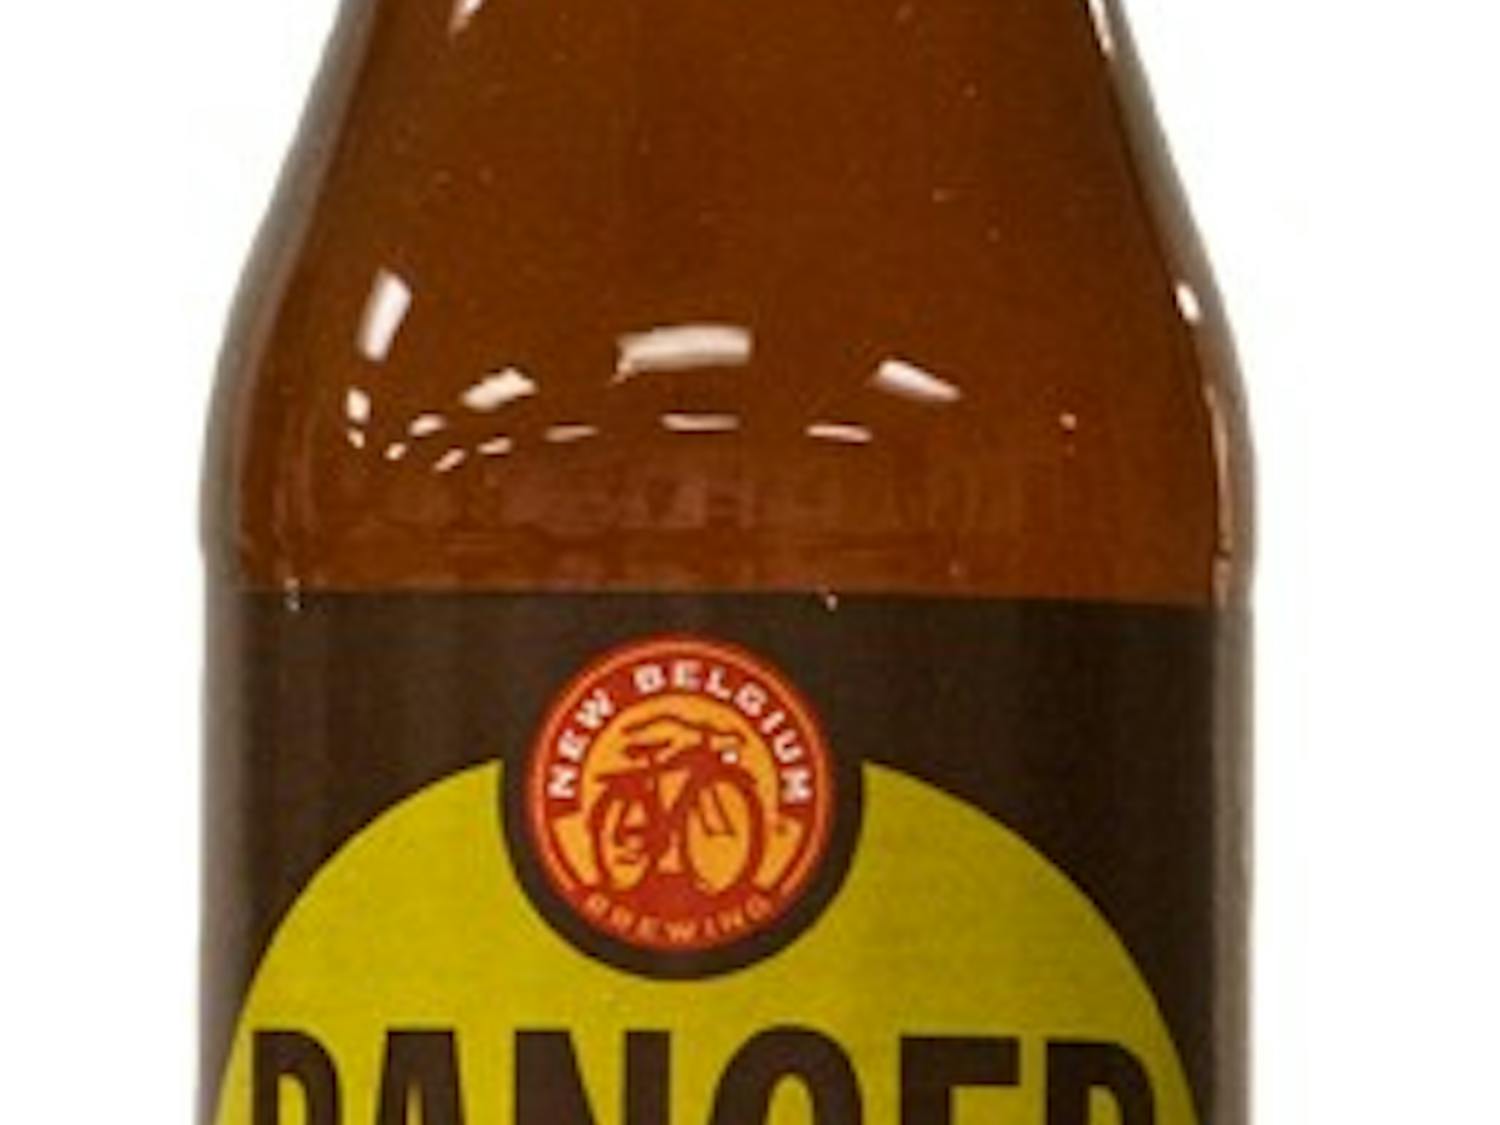 New Beer Tuesday--Ranger India Pale Ale